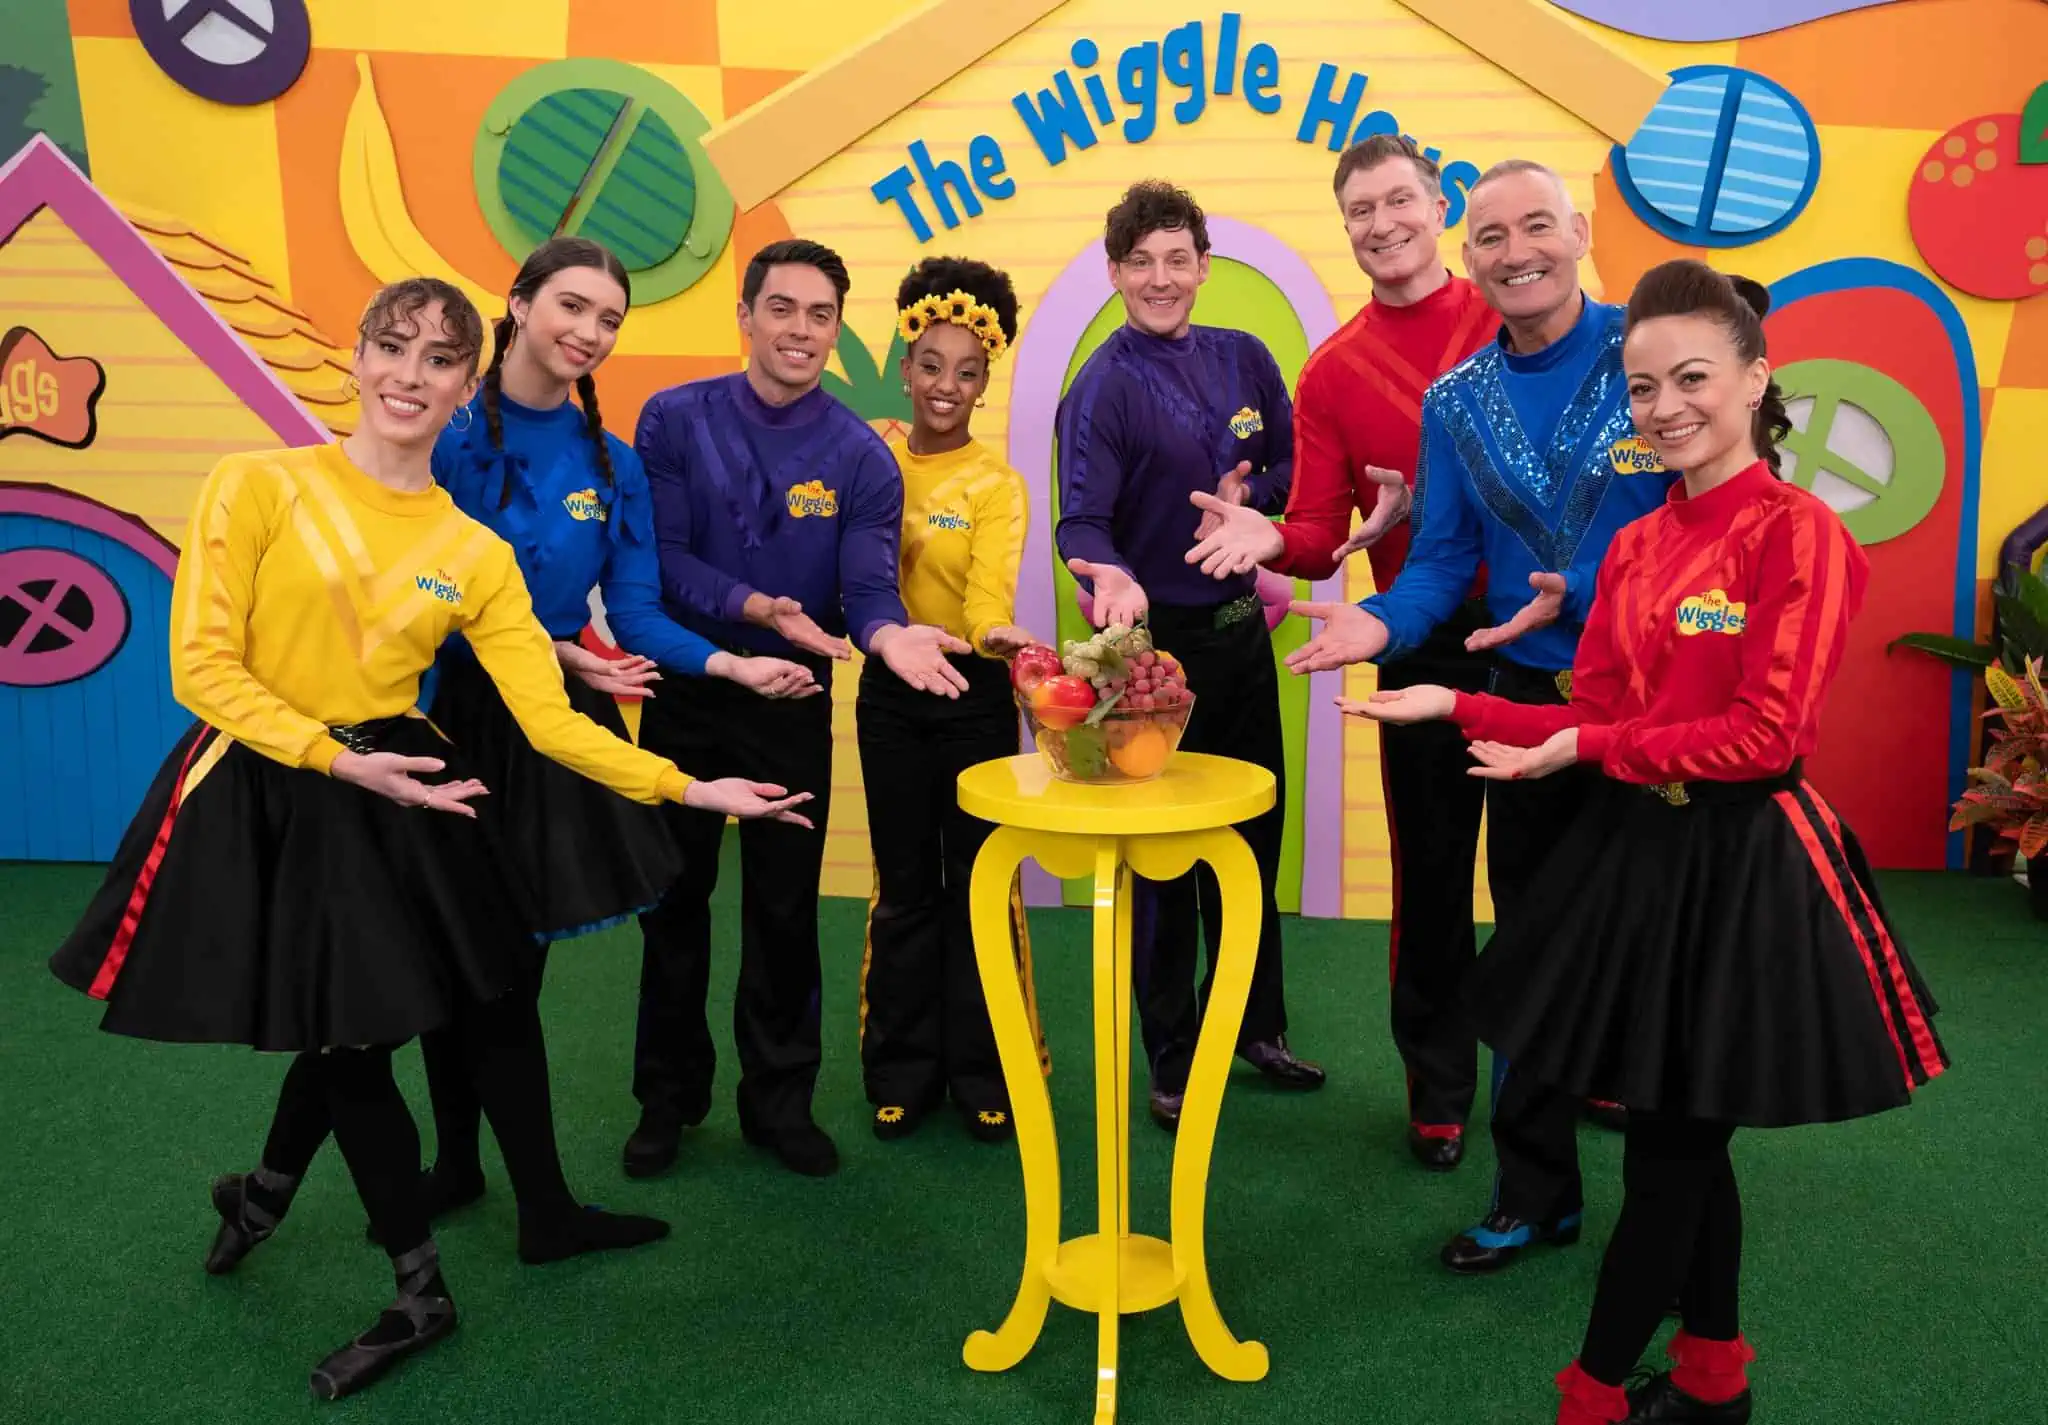 Wiggles The Wiggles kids singers musicians children's entertainers kids band